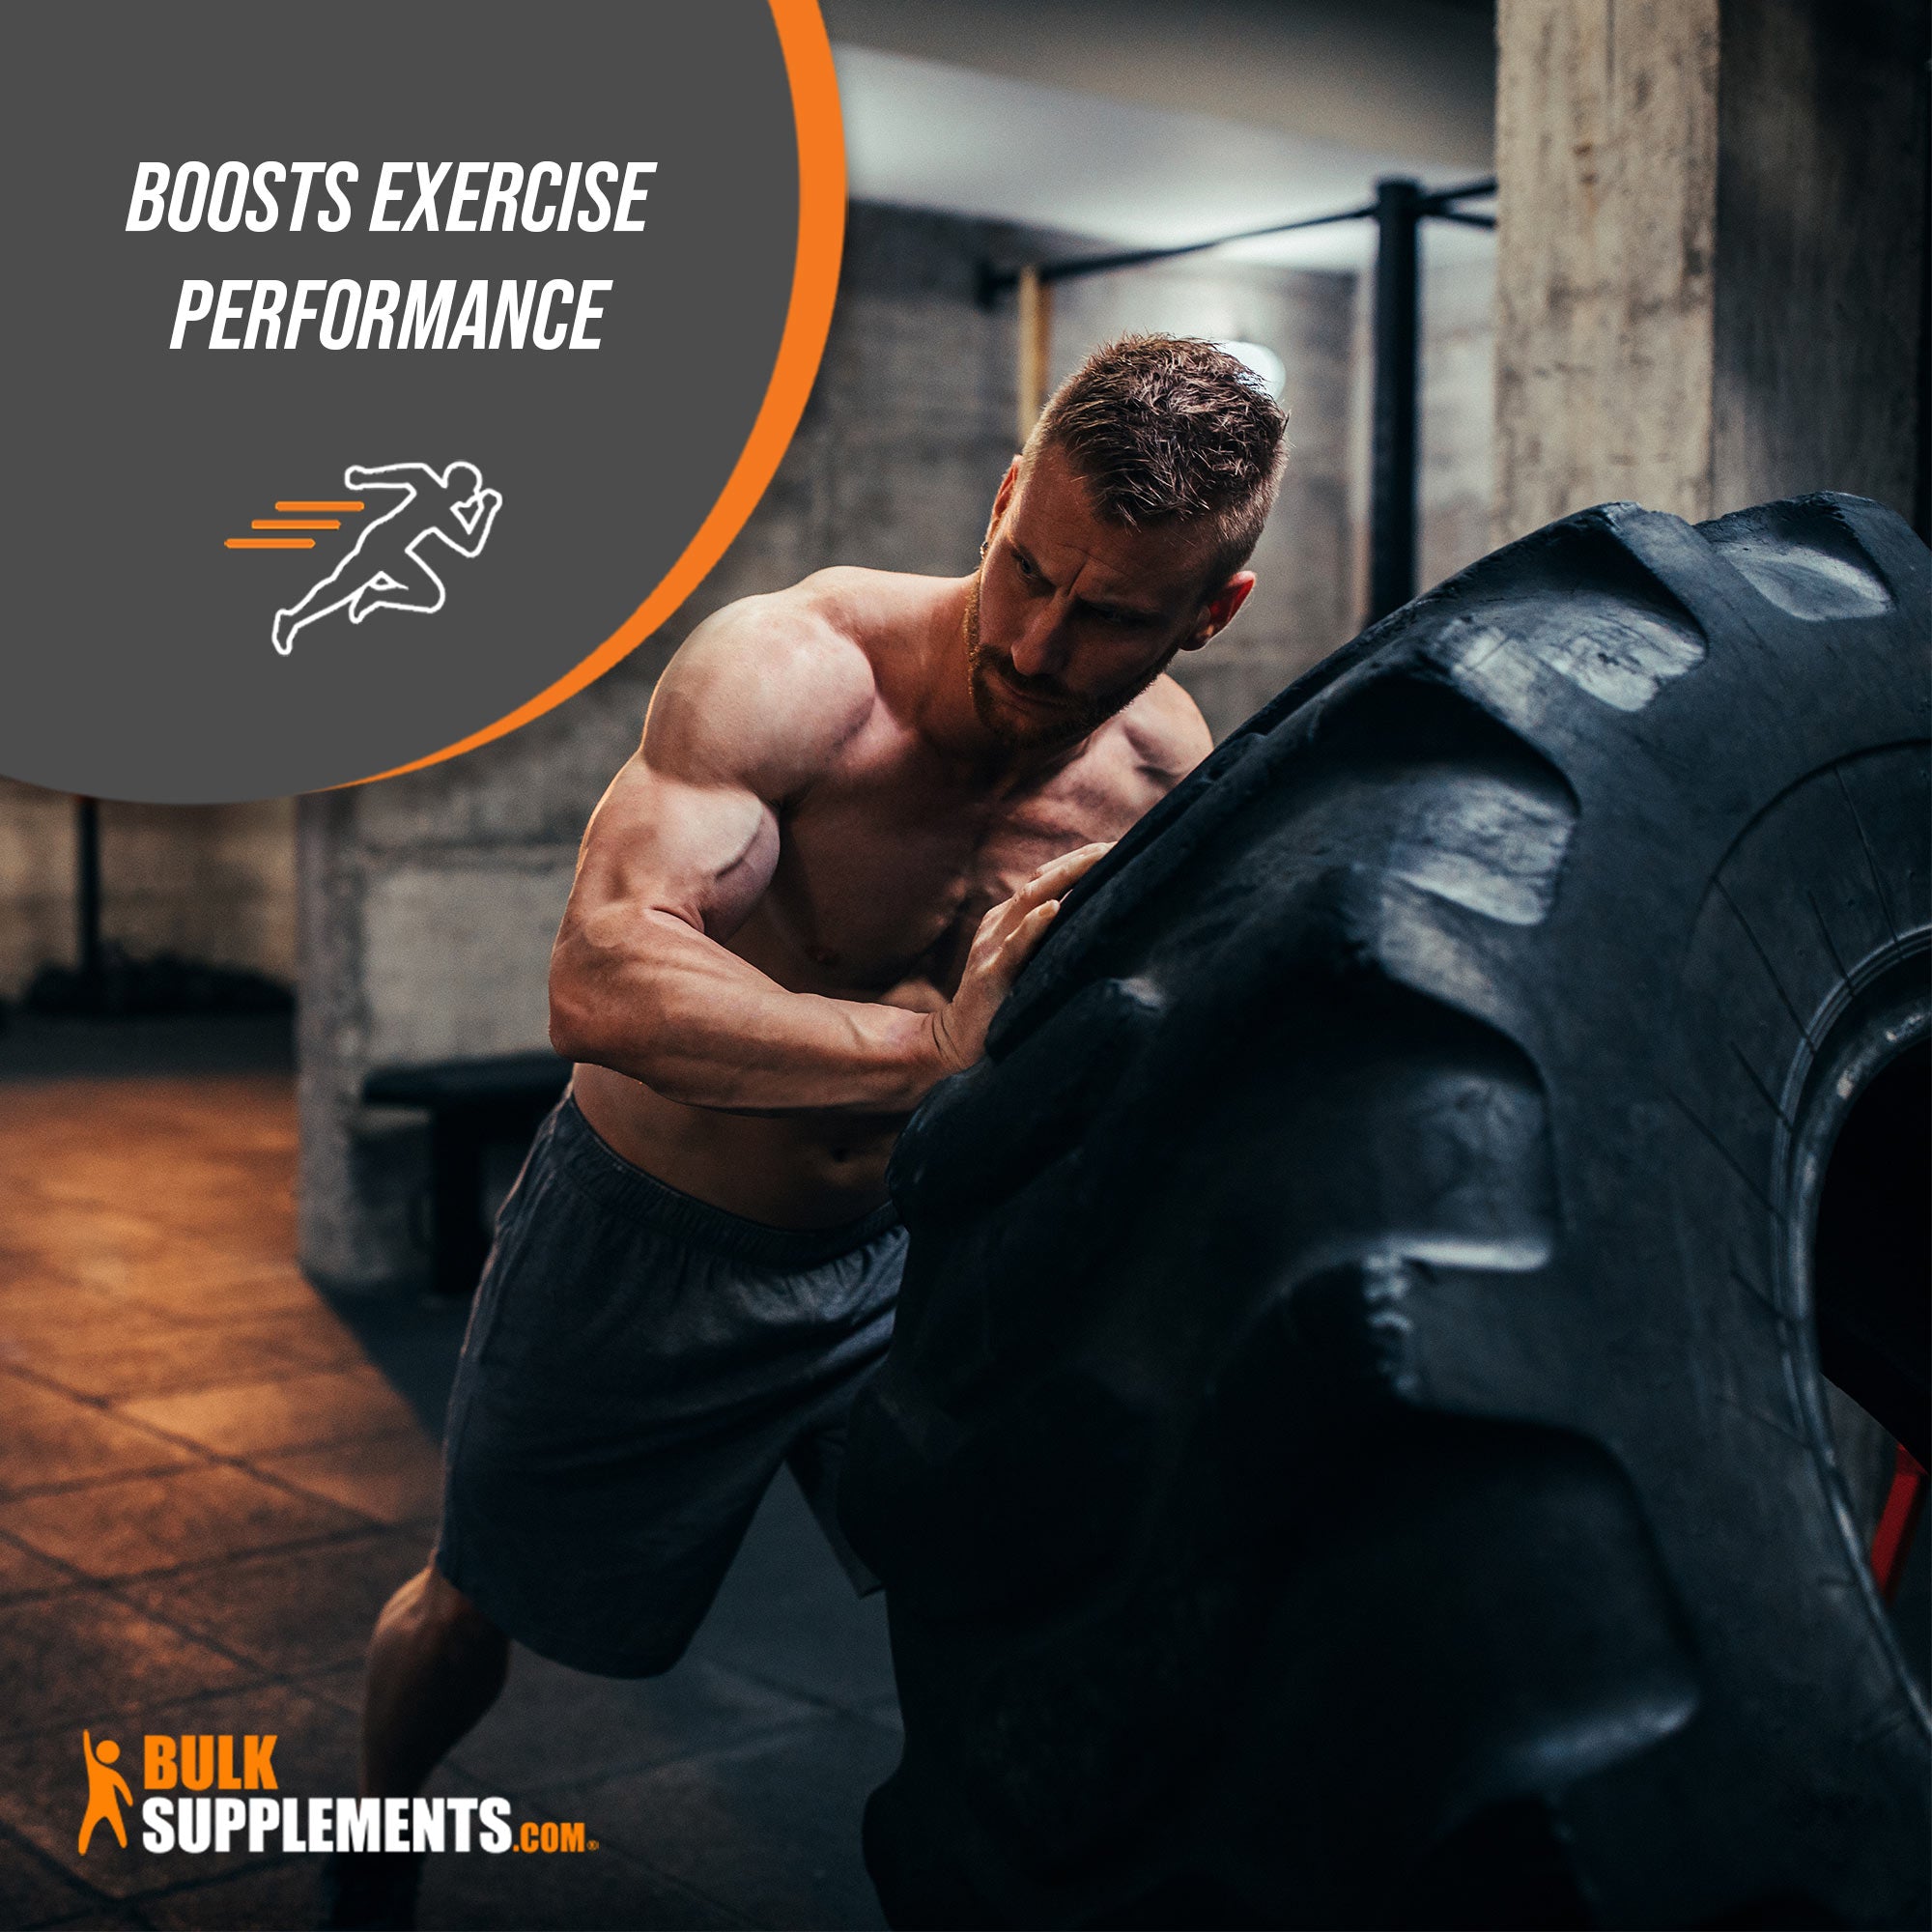 L Ornithine supplement for exercise performance